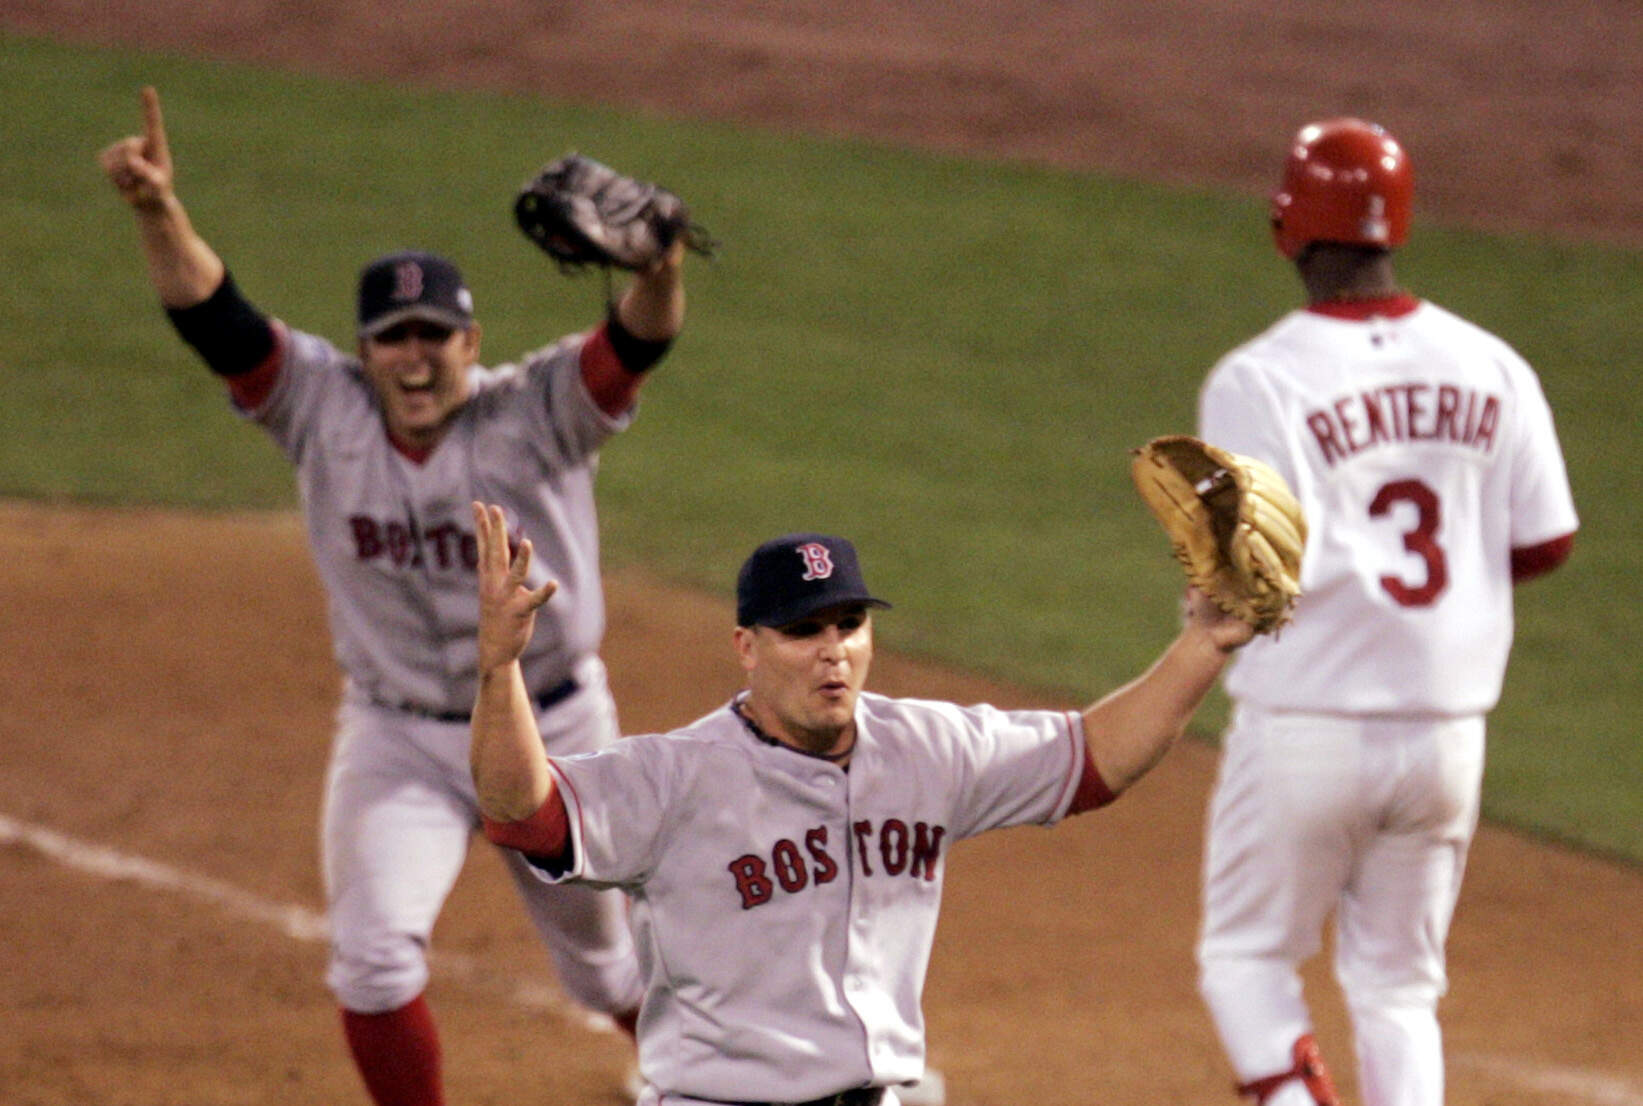 Red Sox pitcher Keith Foulke reminisces on 2004 World Series championship